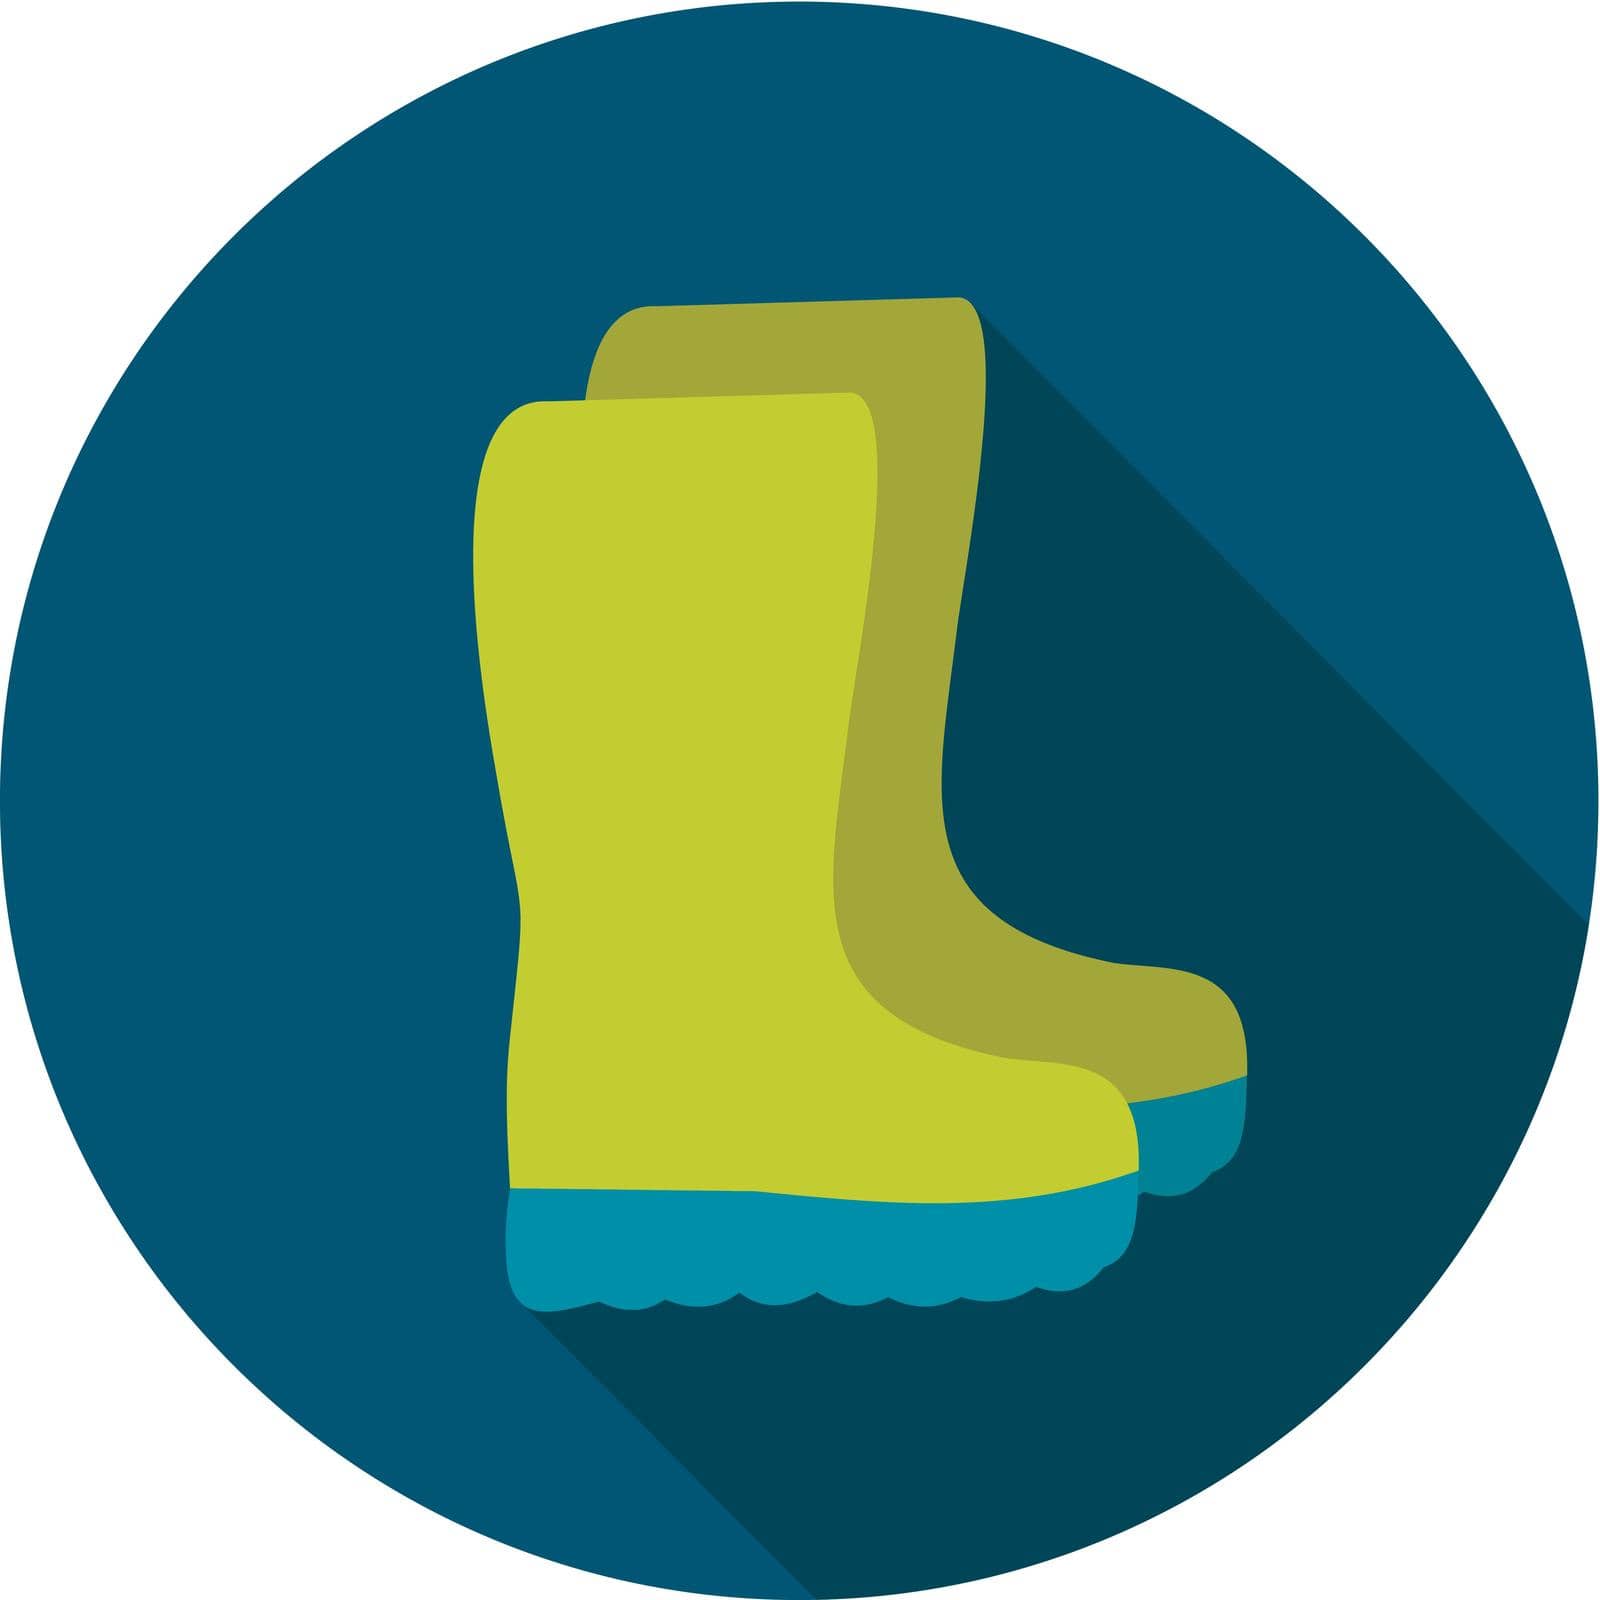 Rubber boots, gumboots, wellies flat vector icon by nosik